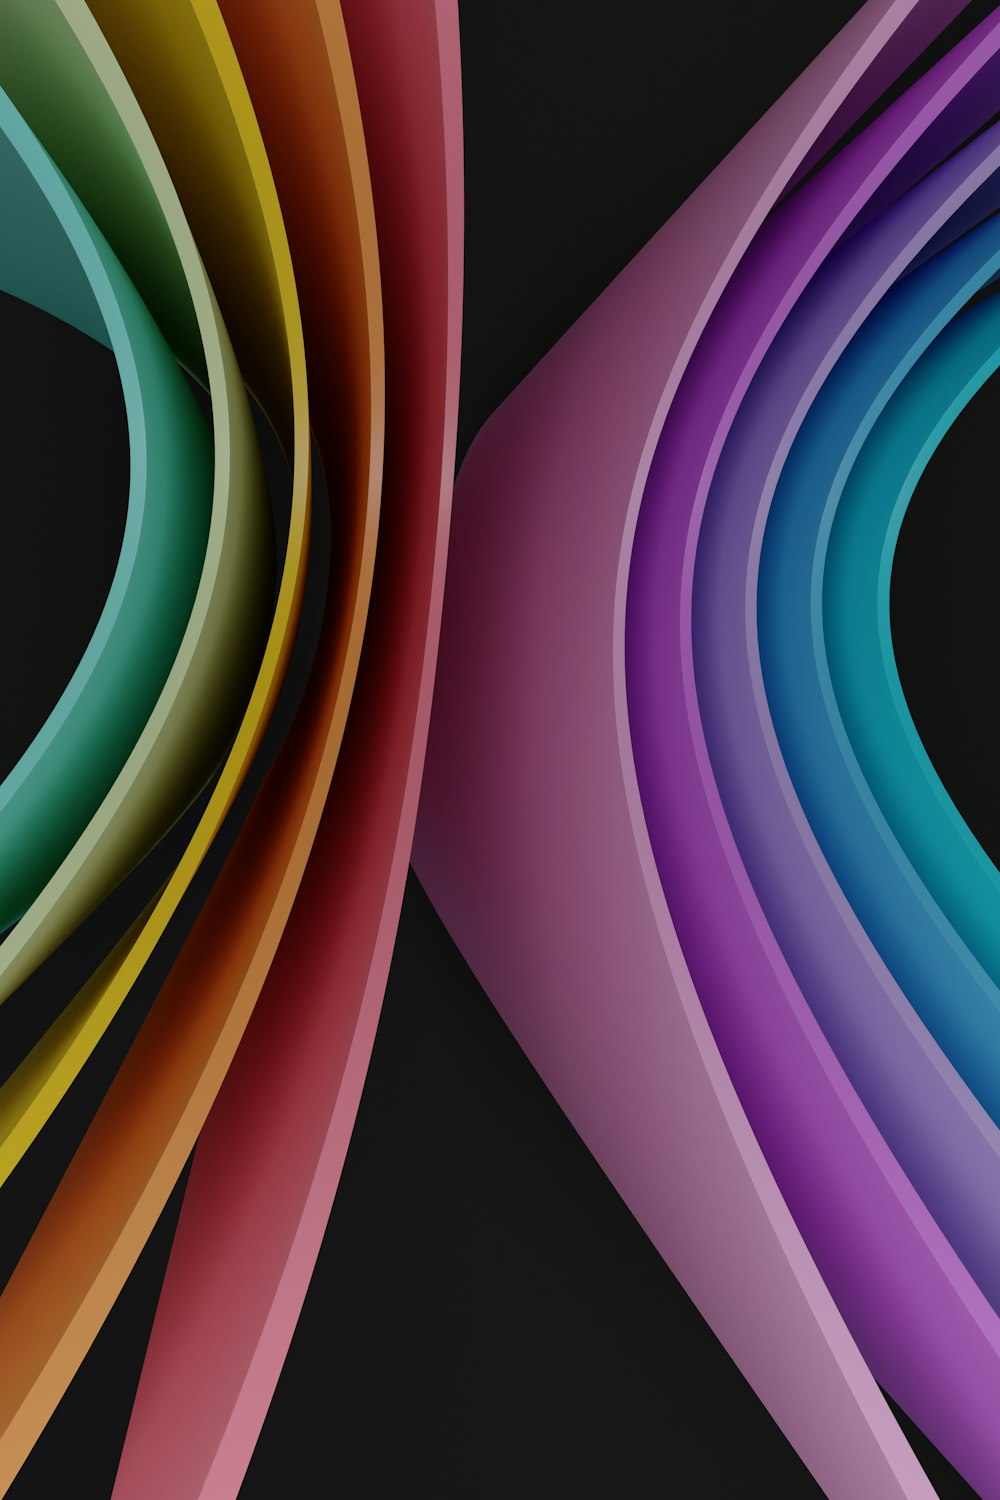 a multicolored abstract background with curved lines